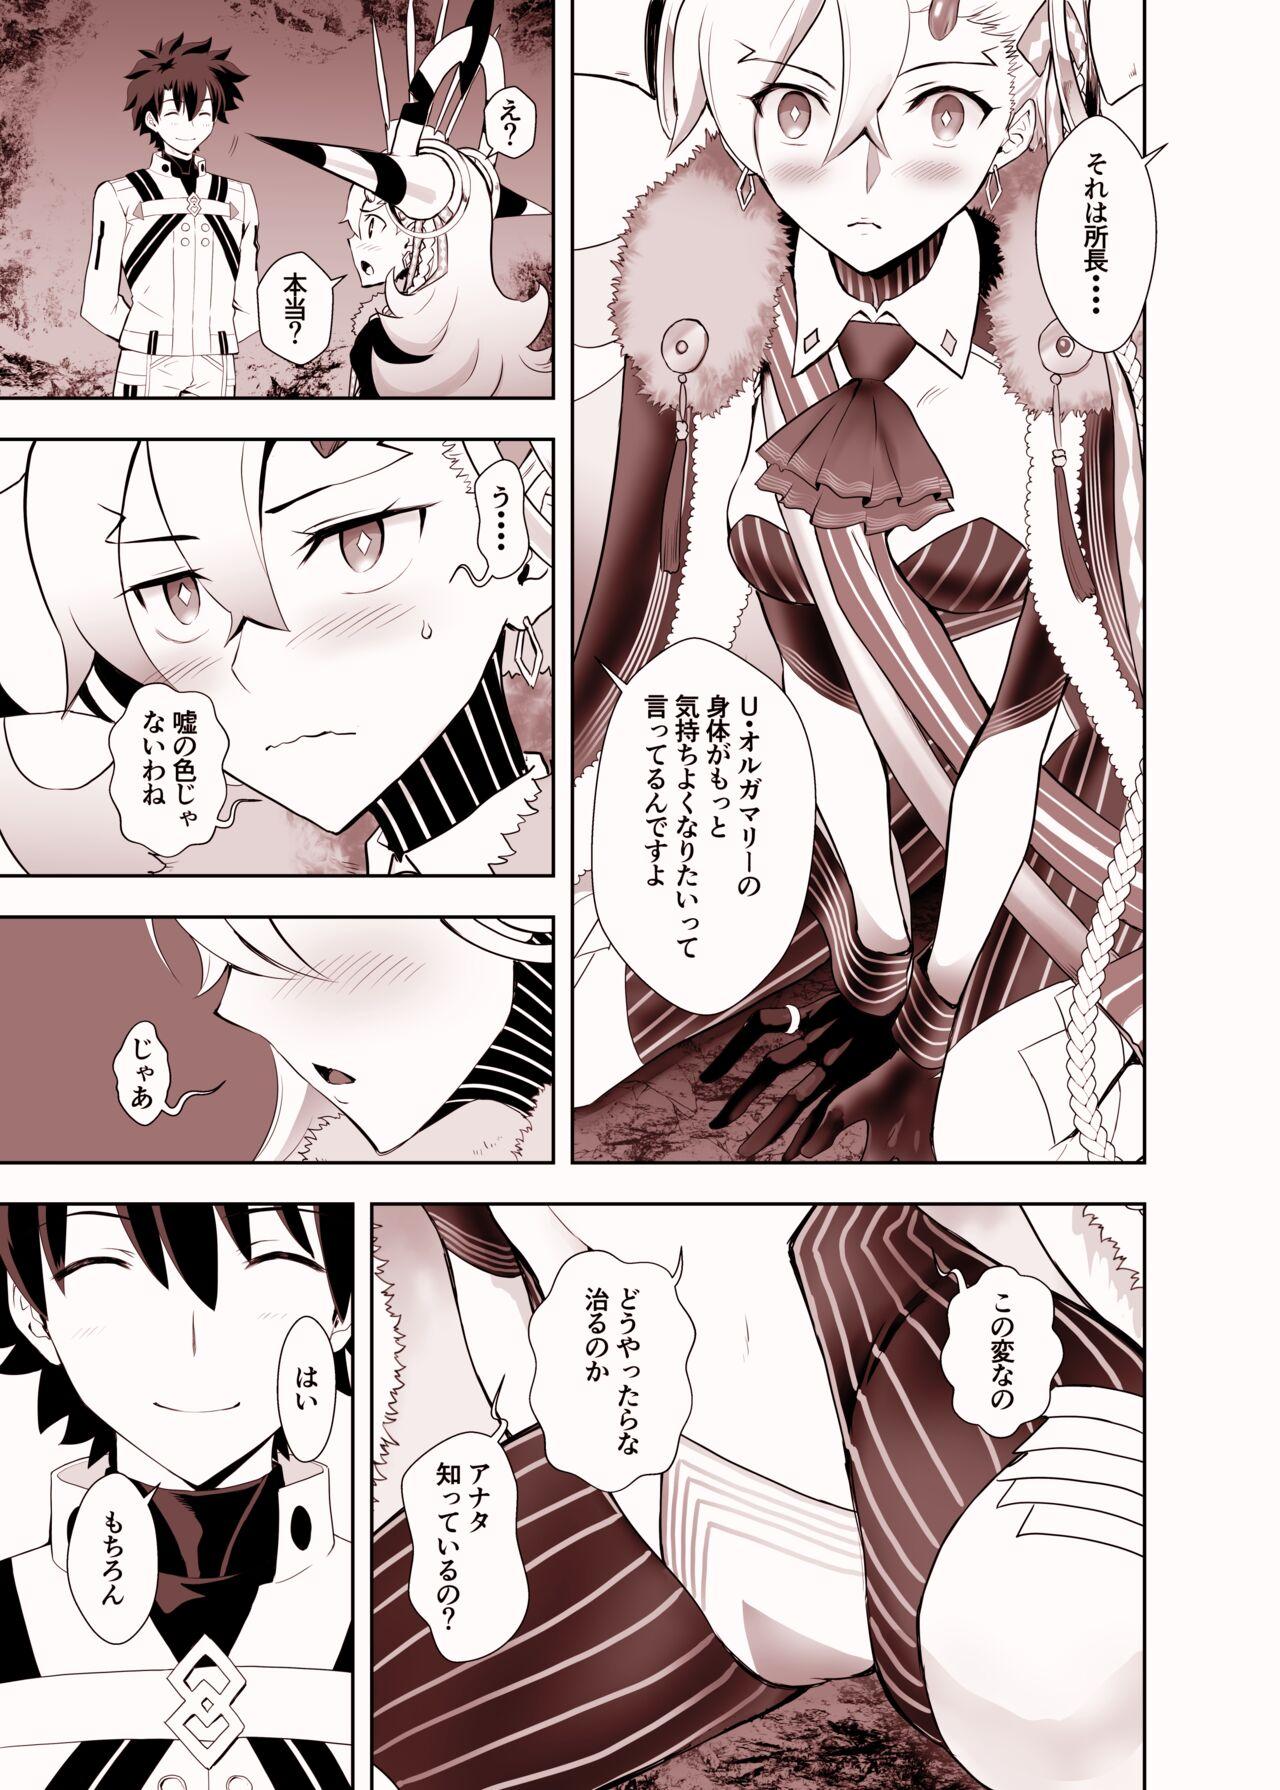 Bound Lovely U - Fate grand order Fleshlight - Page 7